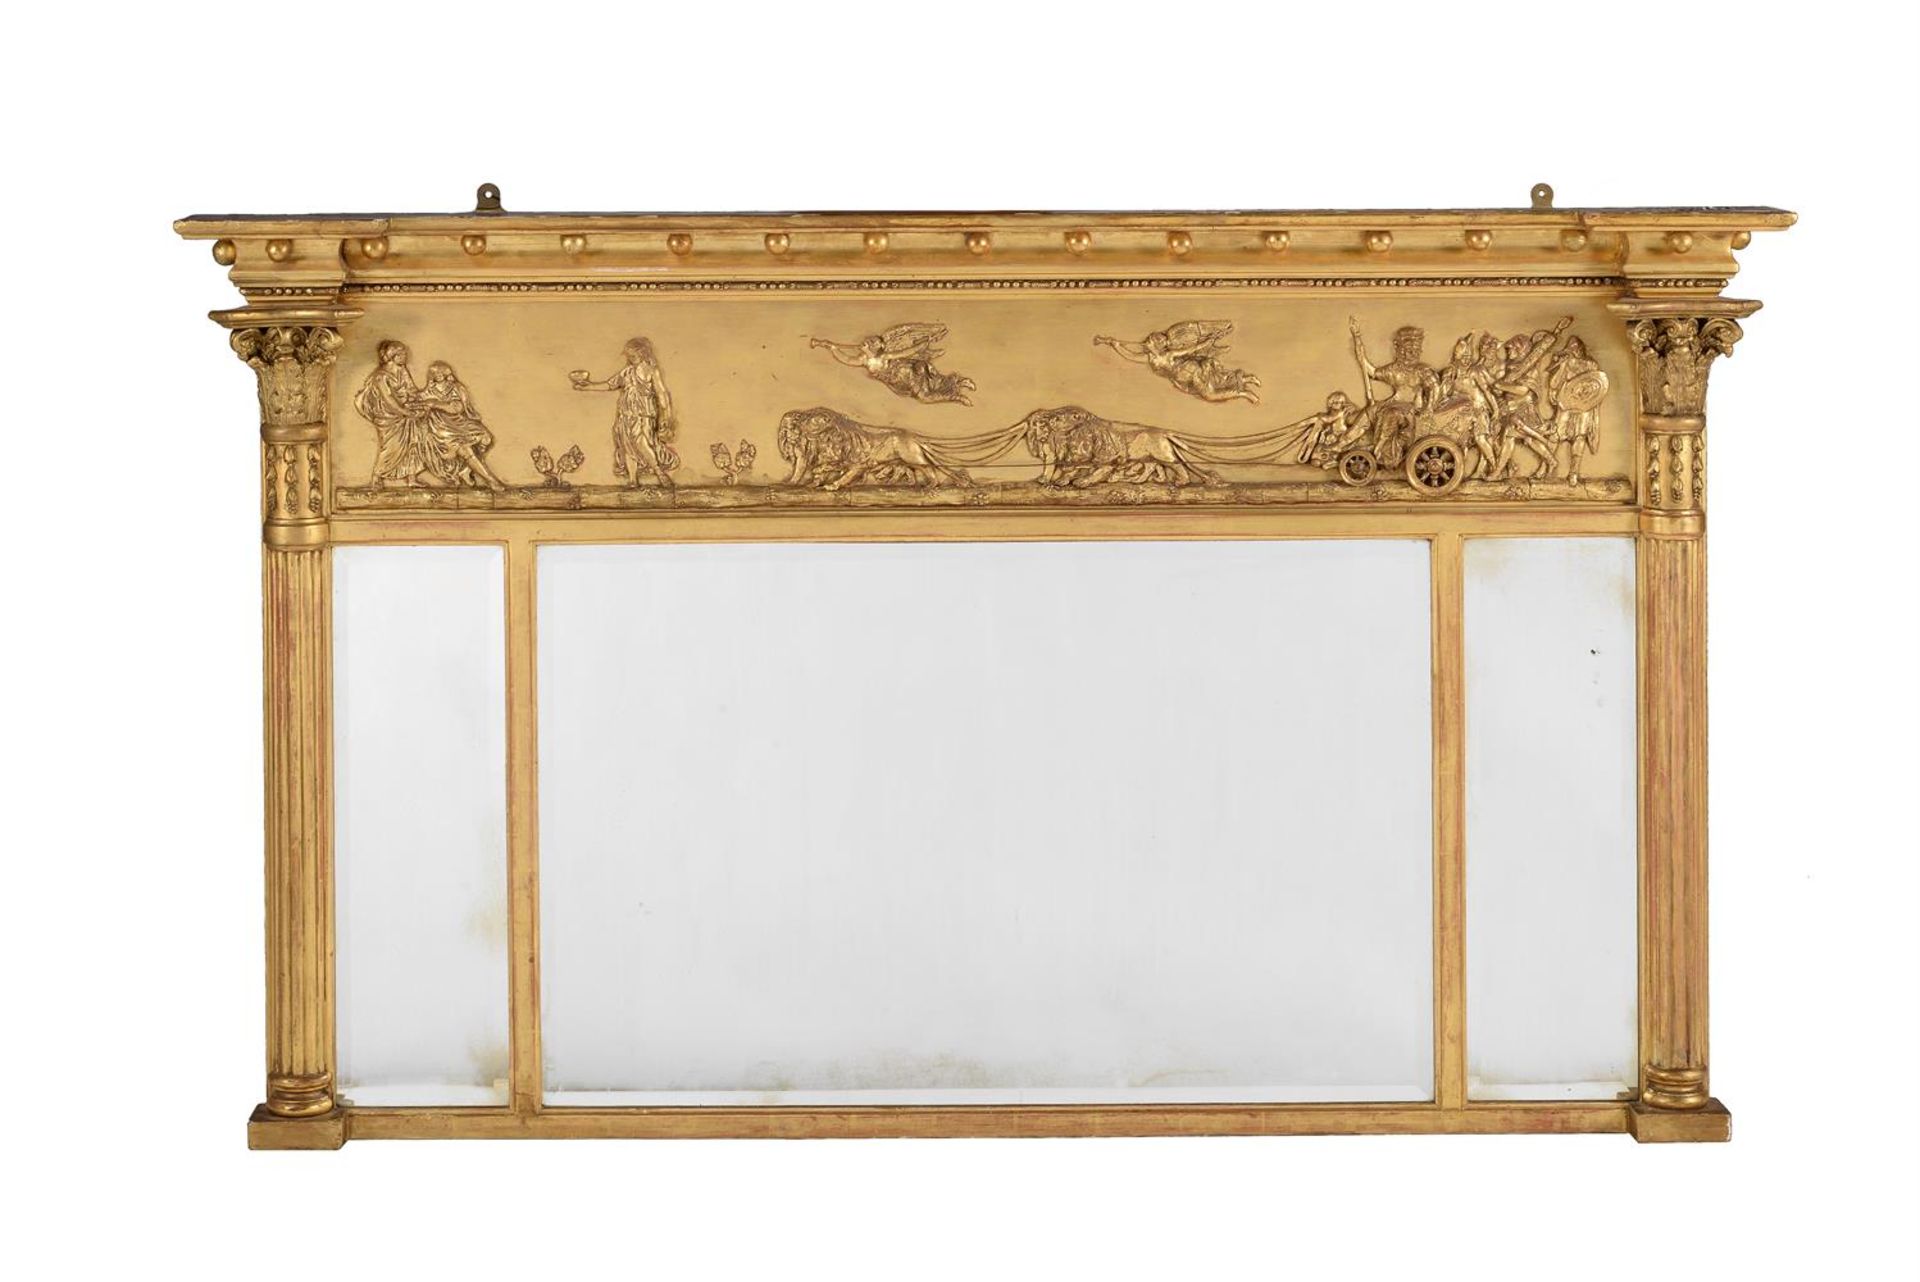 A GILTWOOD AND GILT GESSO OVERMANTEL WALL MIRROR, EARLY 19TH CENTURY